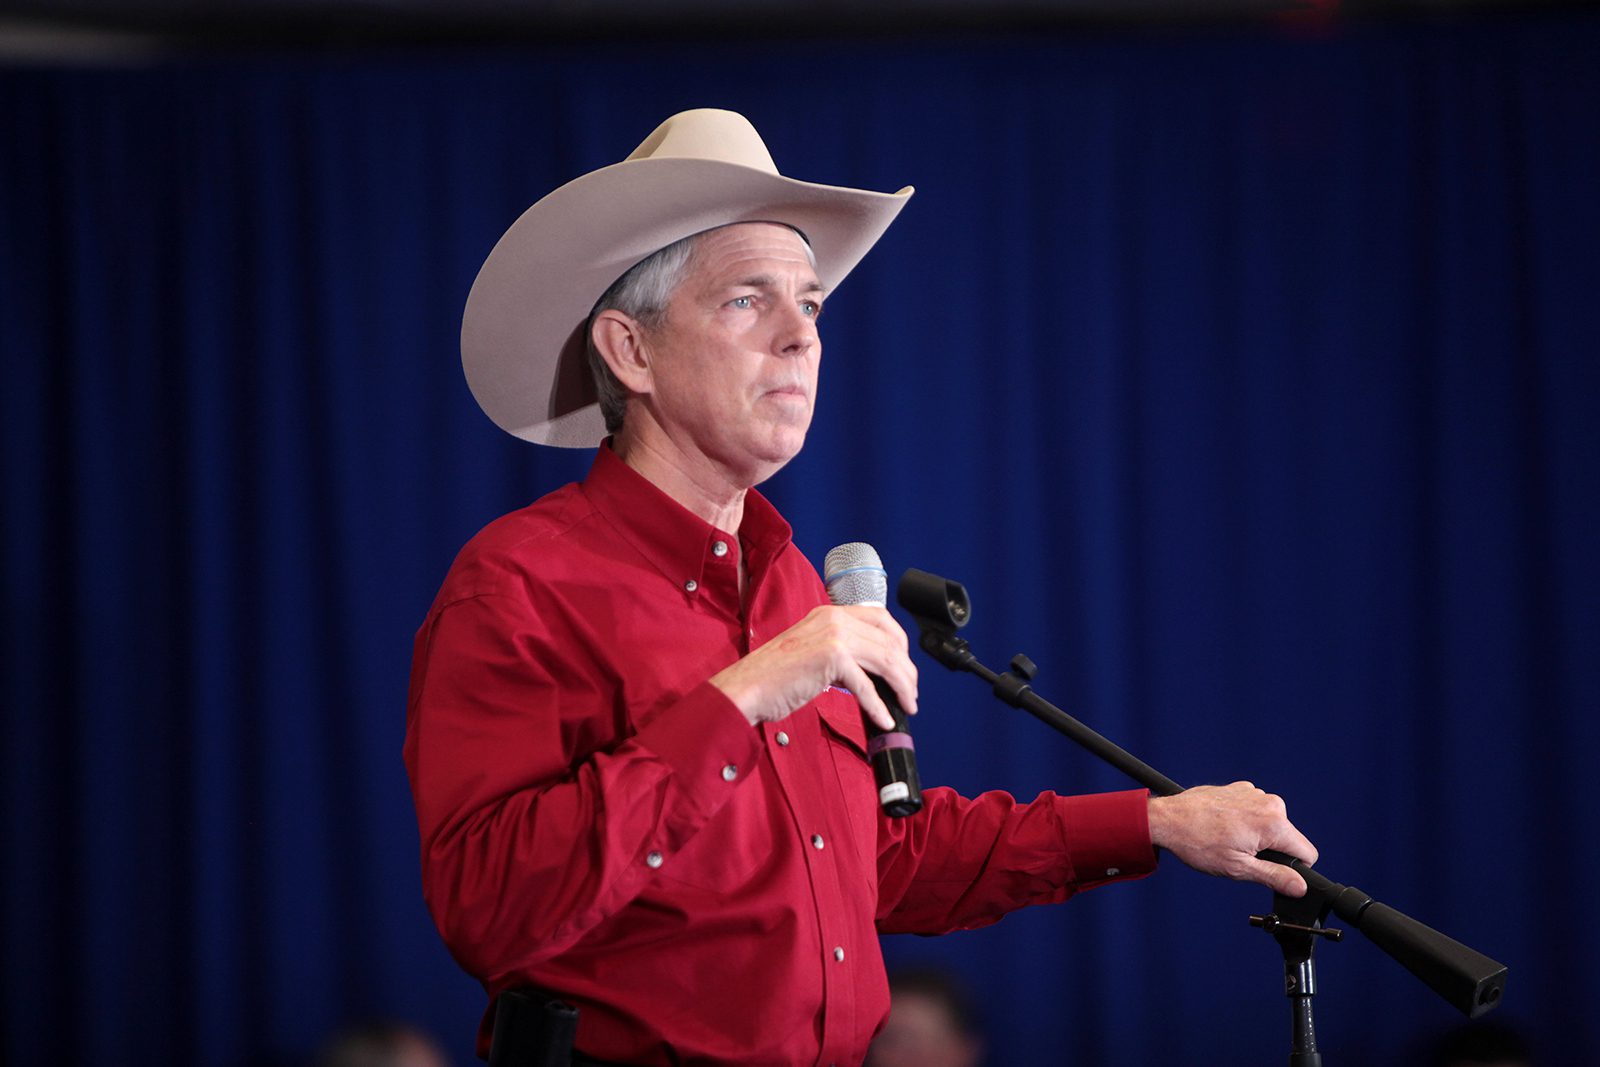 David Barton speaks at a Nevada Courageous Conservatives rally with U.S. Senator Ted Cruz and Glenn Beck hosted by Keep the Promise PAC at the Henderson Convention Center in Henderson, Nevada, on Feb. 21, 2016. Photo by Gage Skidmore/Flickr/Creative Commons